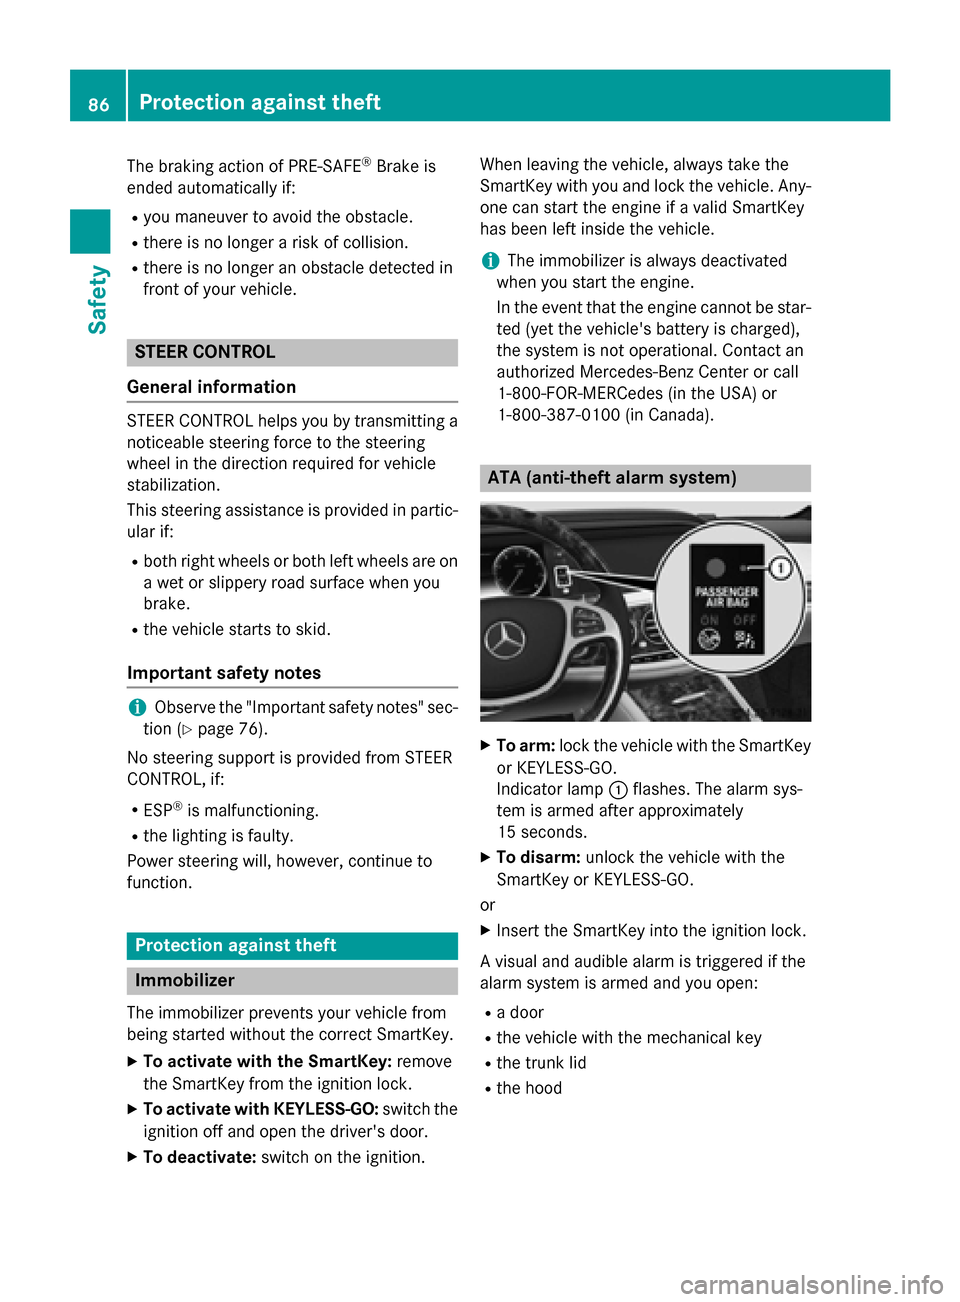 MERCEDES-BENZ S-Class 2015 W222 Service Manual The braking action of PRE-SAFE
®
Brake is
ended automatically if:
R you maneuver to avoid the obstacle.
R there is no longer a risk of collision.
R there is no longer an obstacle detected in
front of